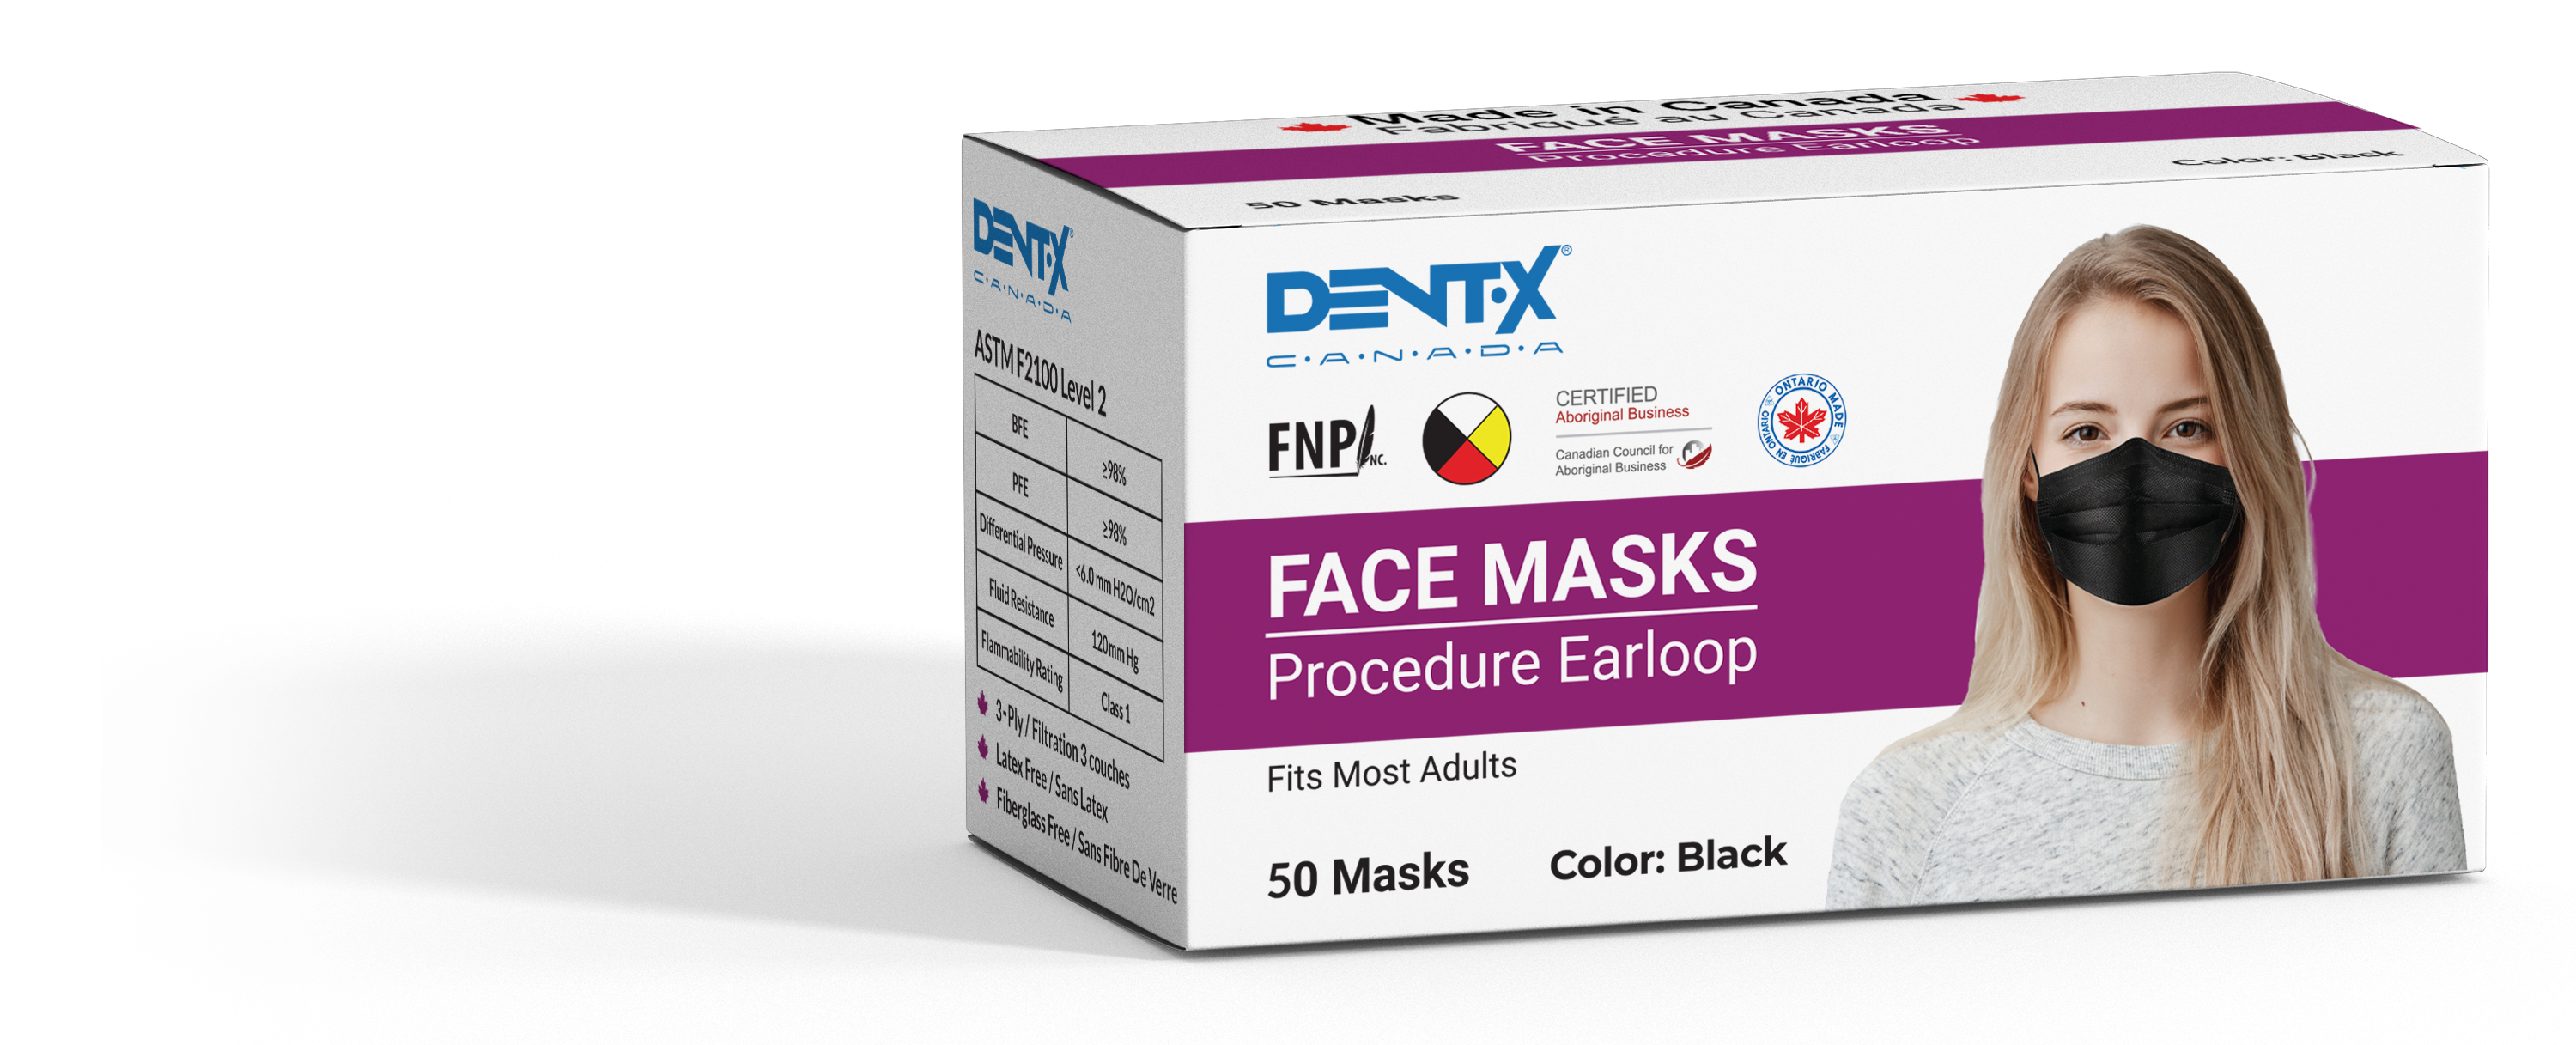 Dent-X BLACK LEVEL 2 ASTM earloop face masks 50/box with security wrap - Made in Canada - 0